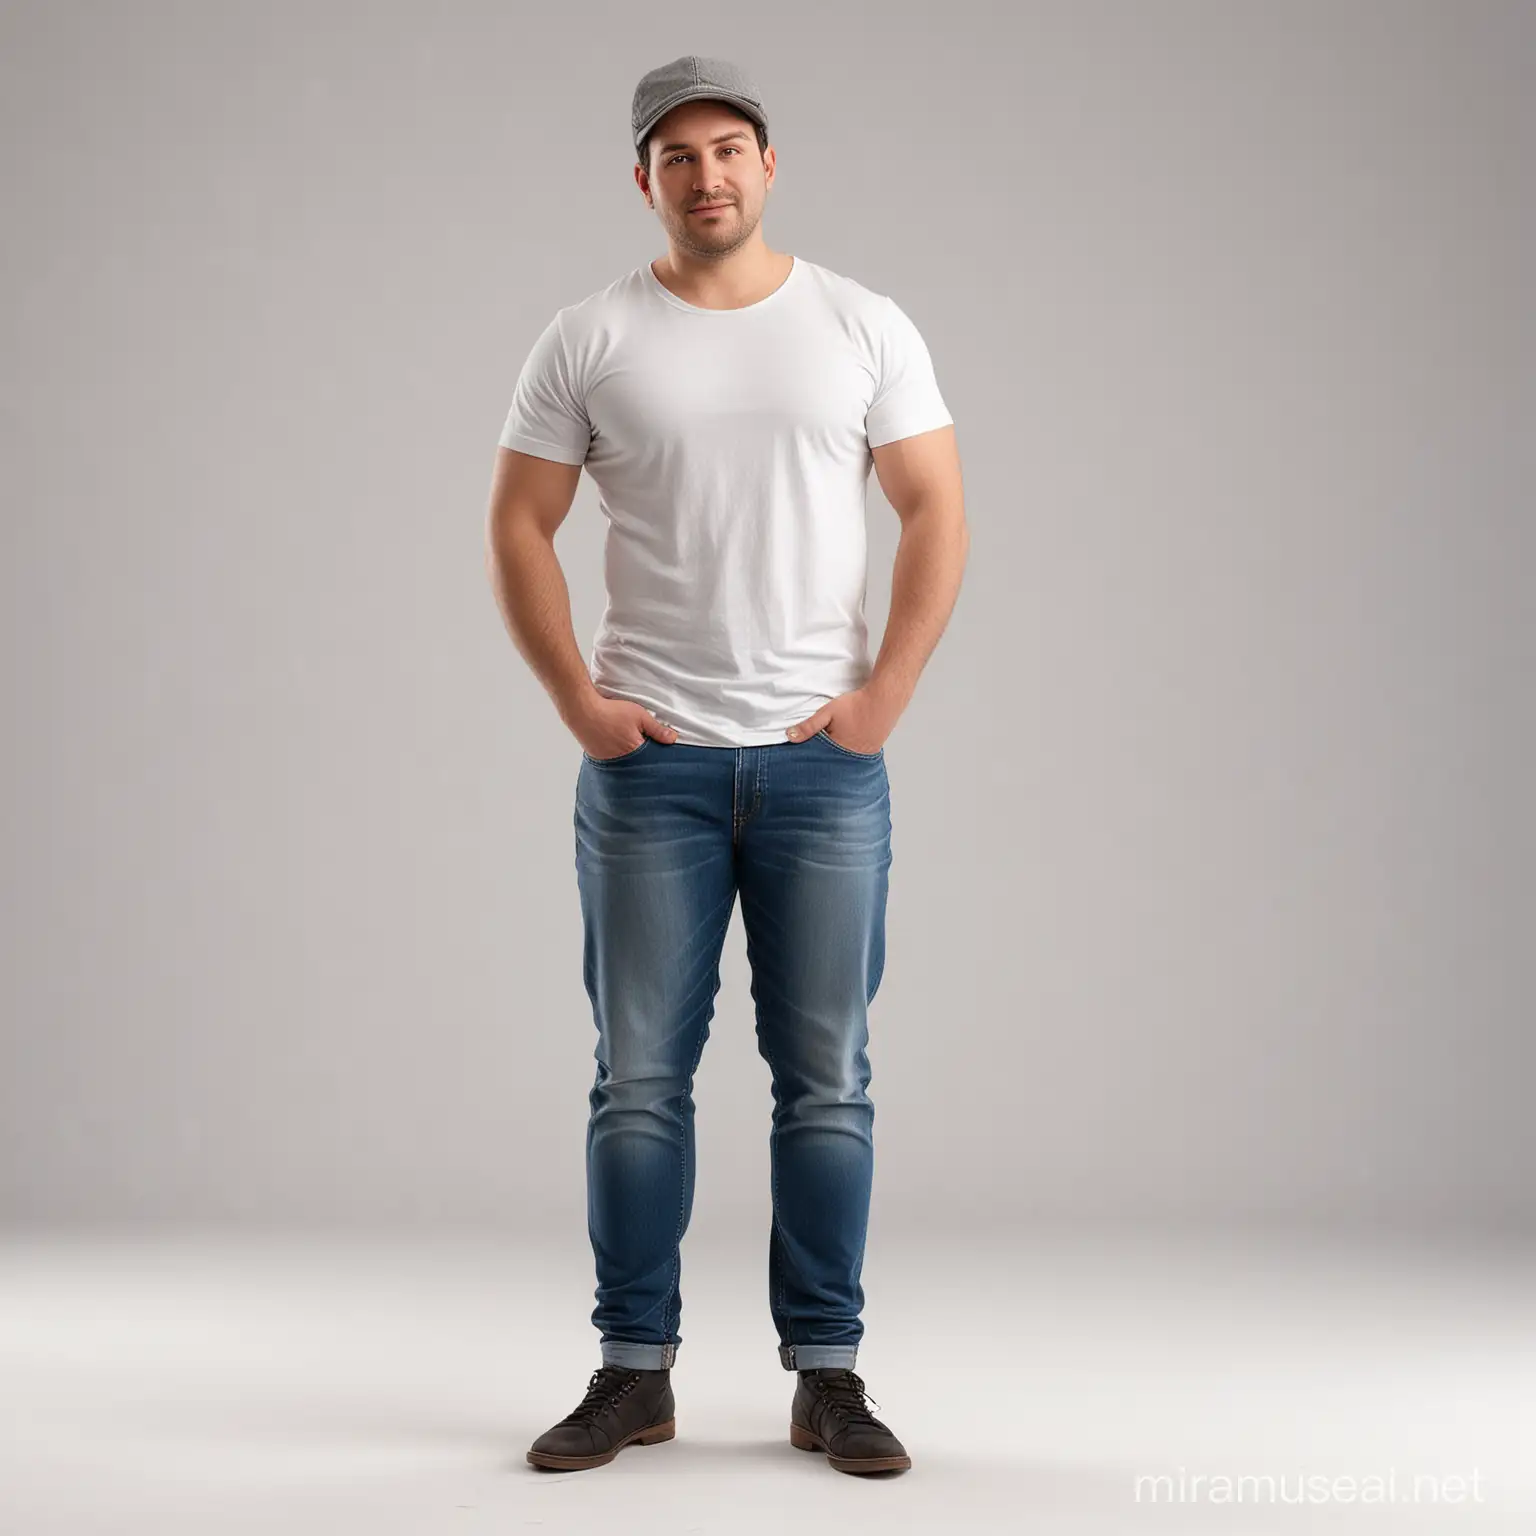 A standing photorealistic man 30 years old,chubby face,wear hat,short hair and black hair,in jeans and a smooth white T-shirt without pockets and strapless, a front view  in a photographic studio isolated on a white background.